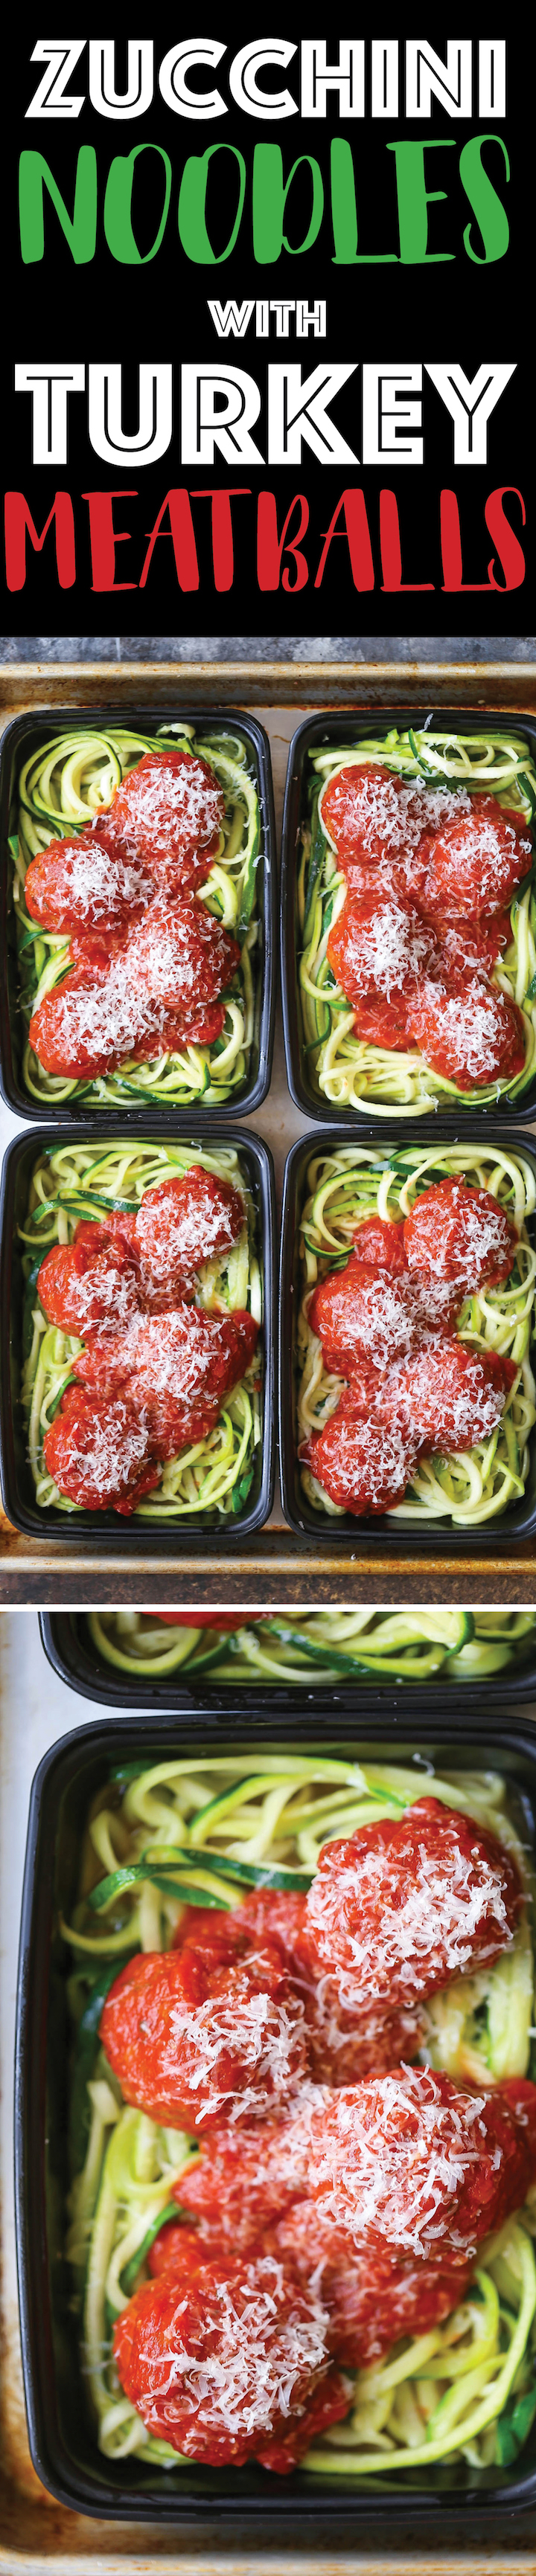 Zucchini Noodles with Turkey Meatballs - These make-ahead meal prep boxes will make you forget all about pasta. It's light, healthy and low carb!